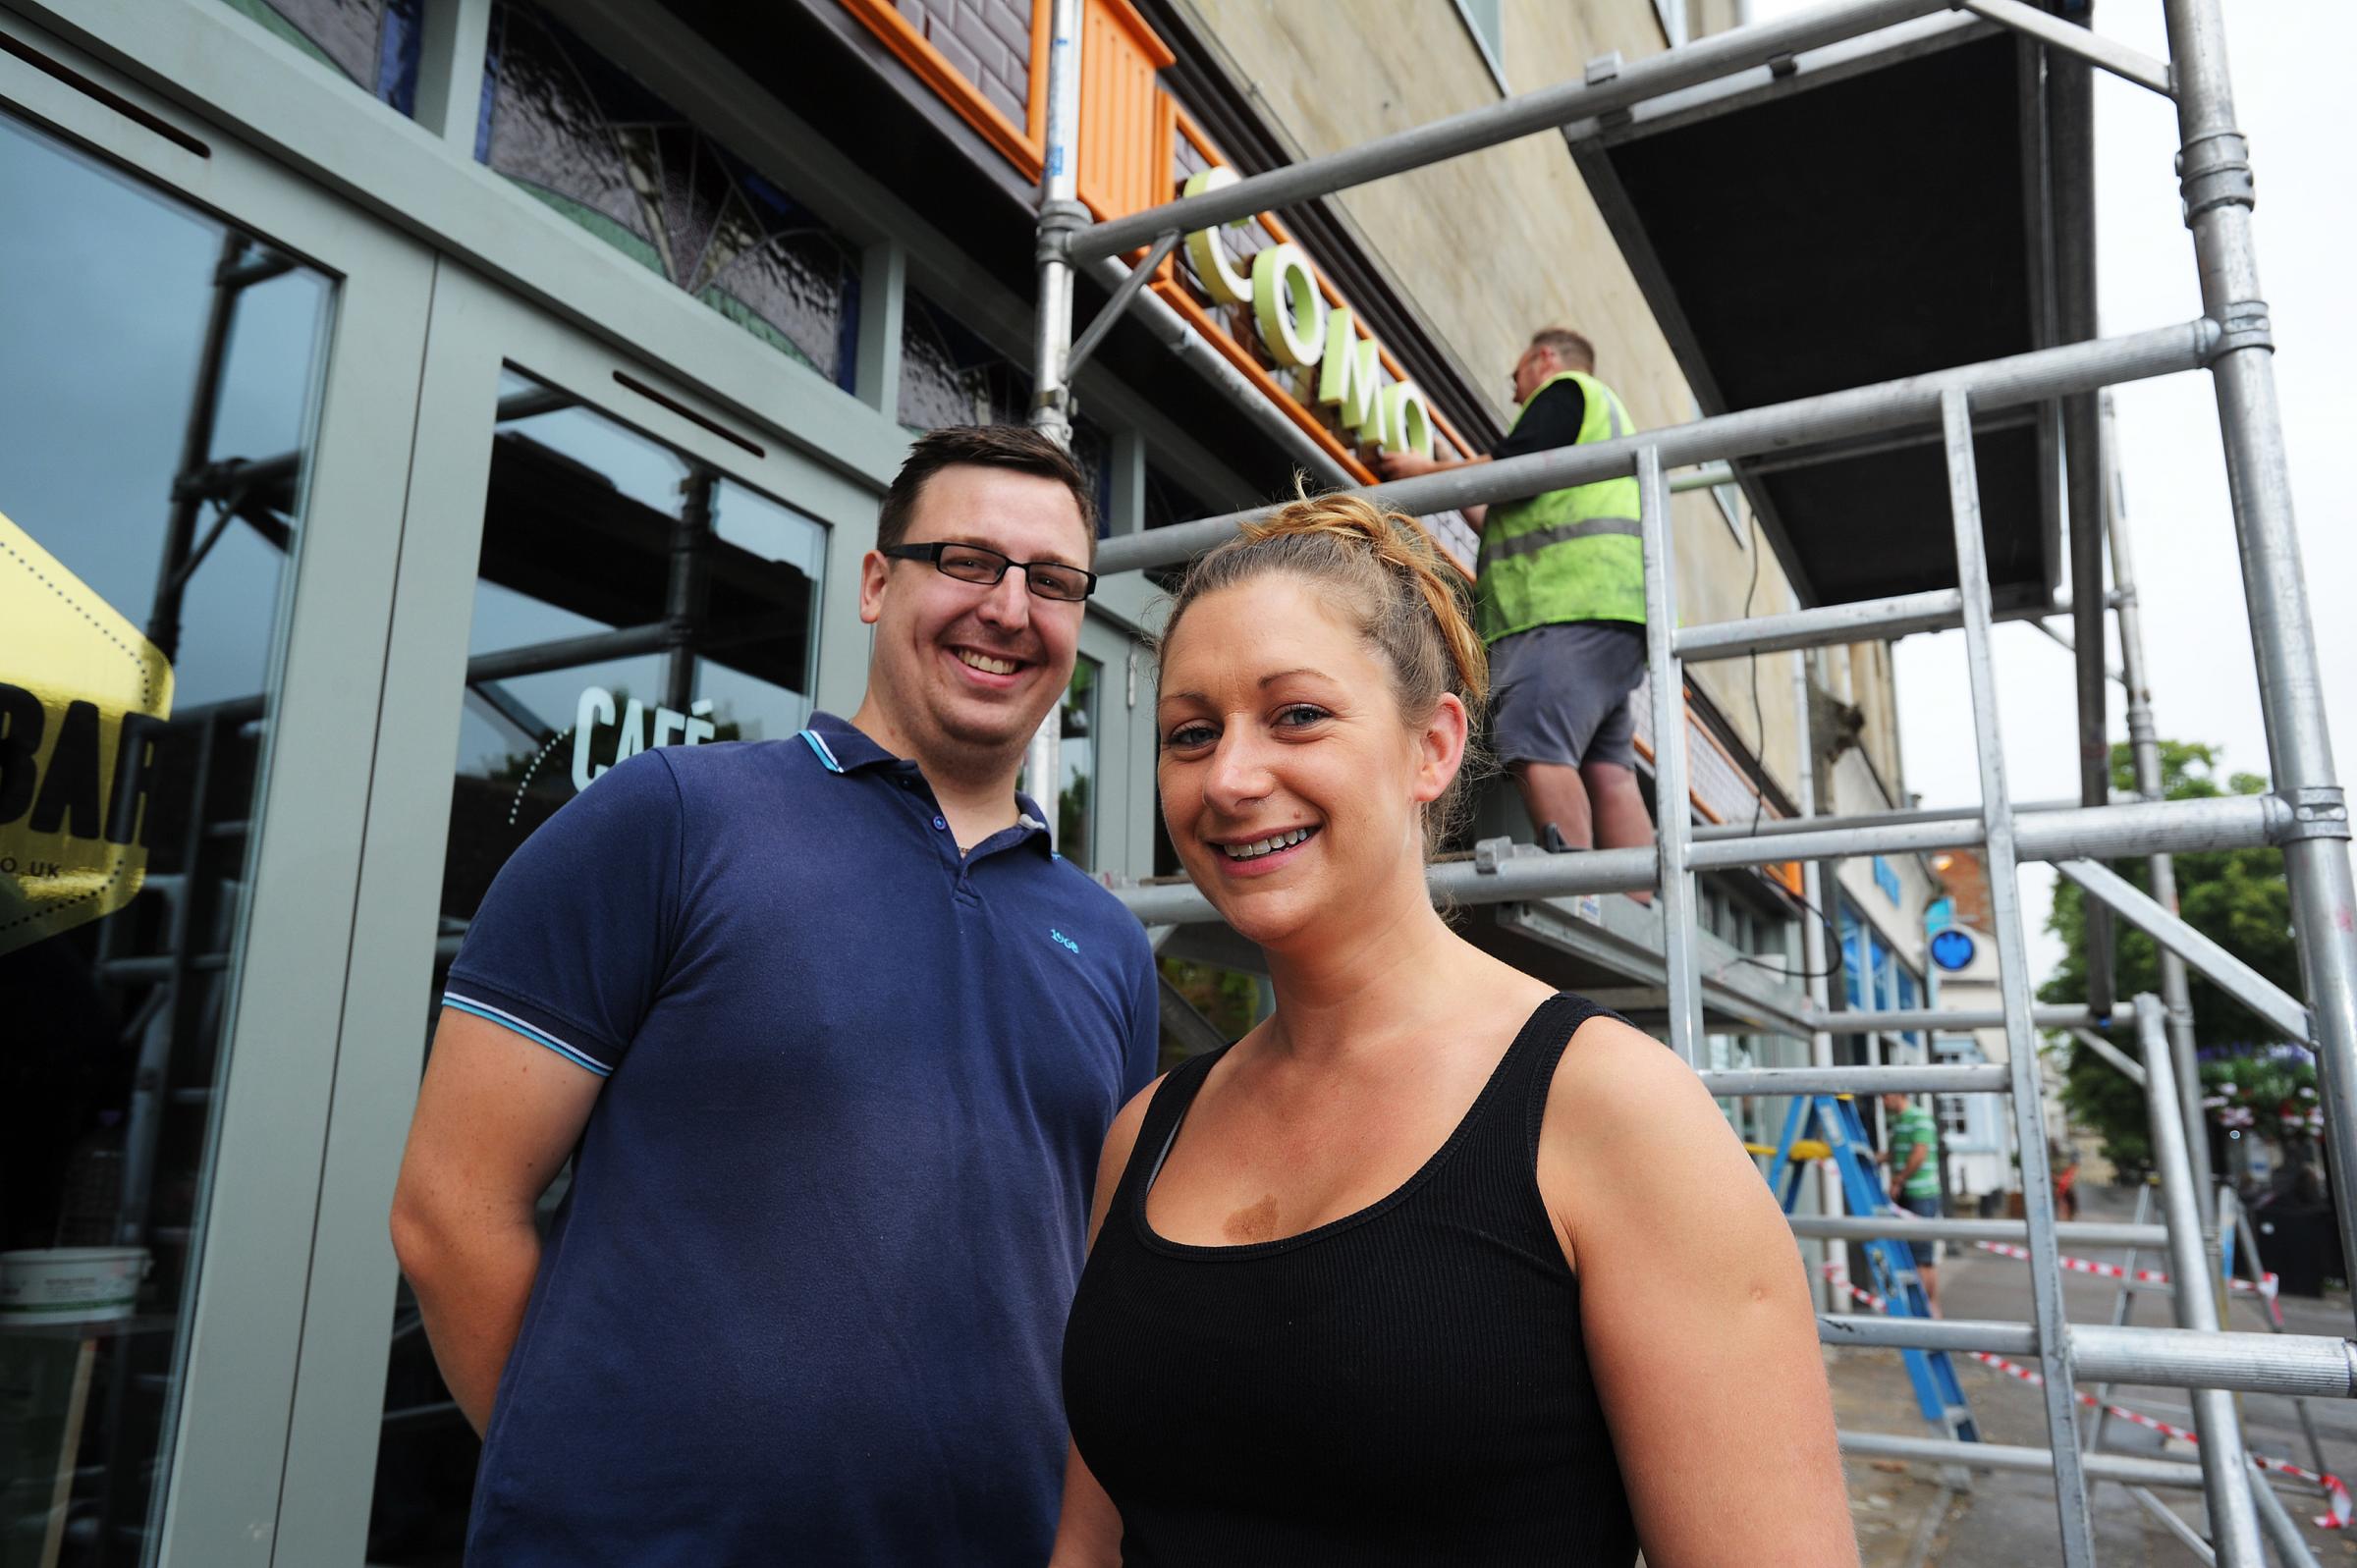 Como Lounge café bar opens at the site formerly occupied by Izis nightclub in the Market Square in Witney in 2014